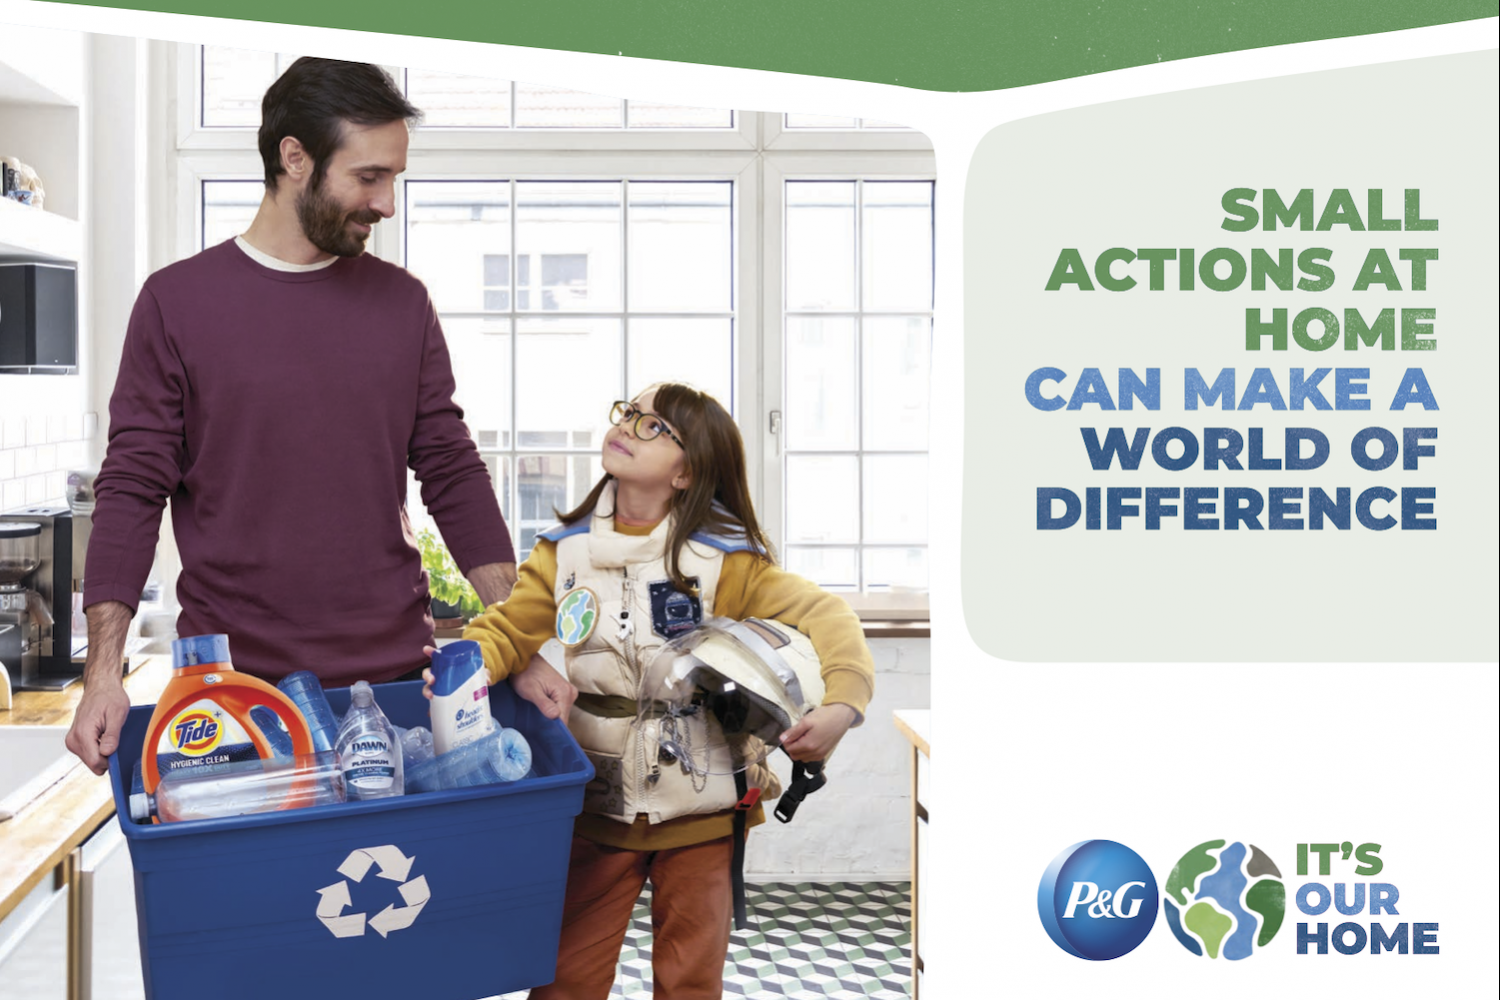 Procter and Gamble Small Actions at Home